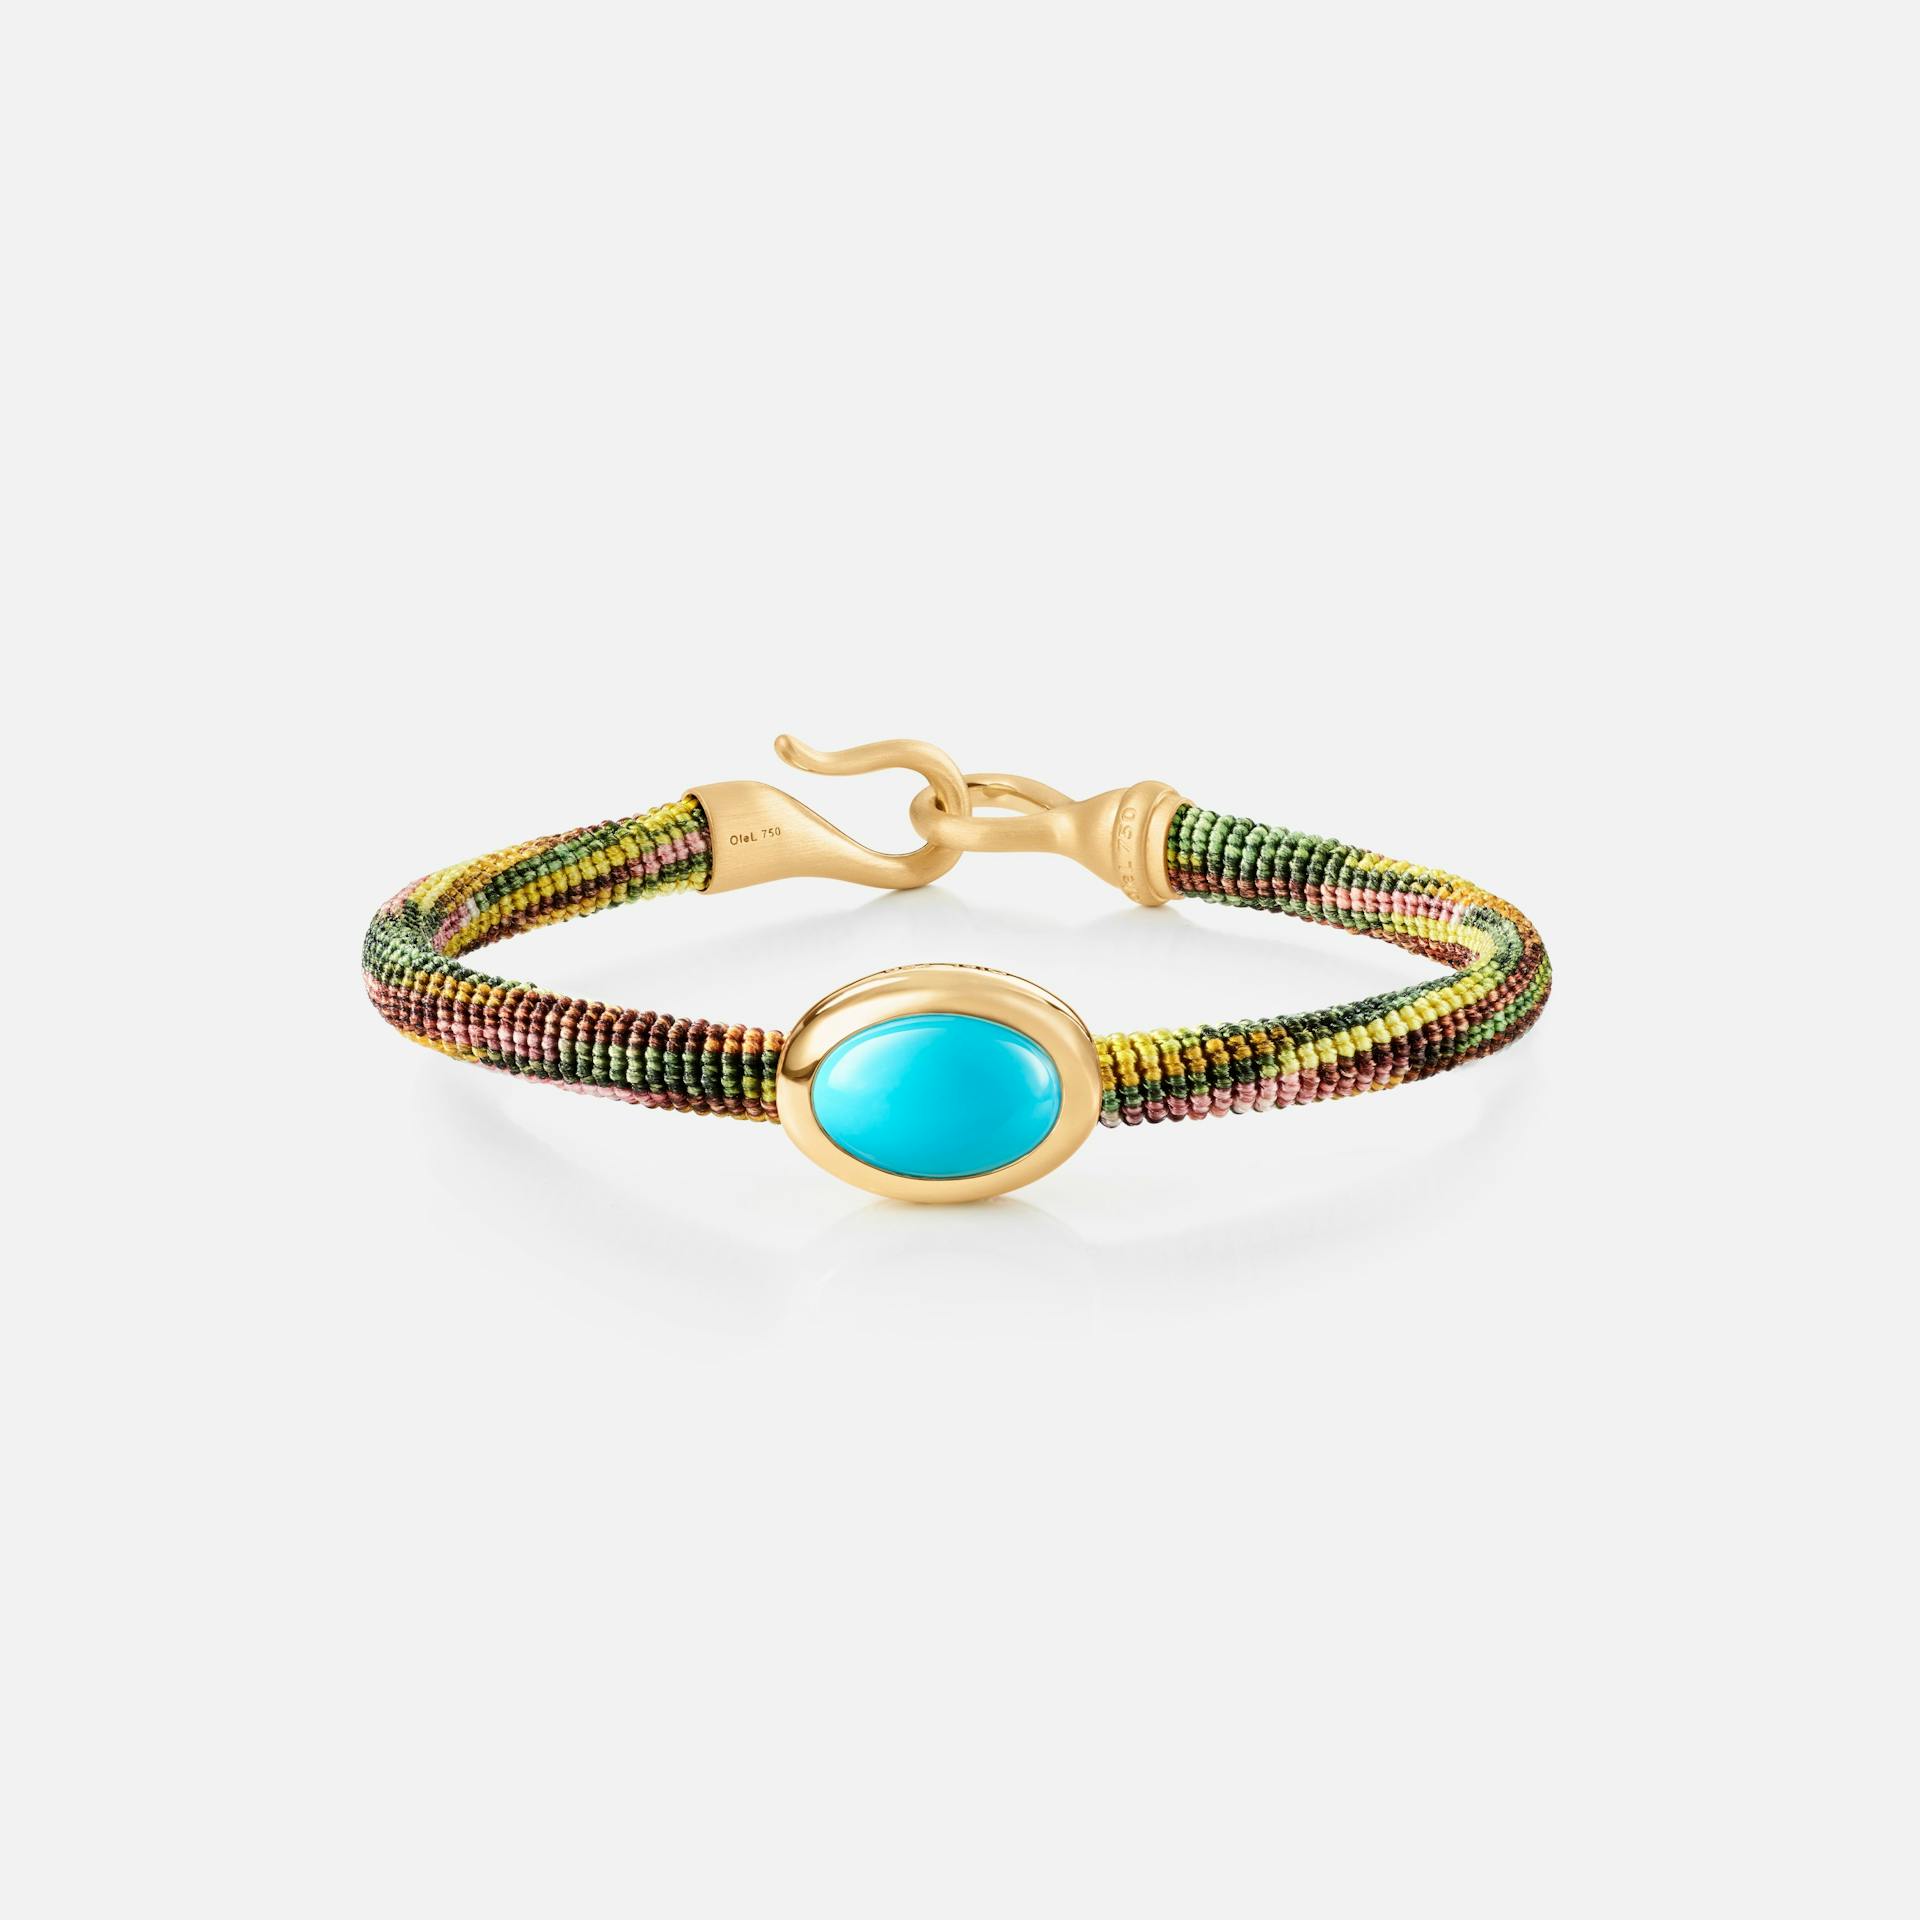 Life Bracelet with turquoise 6 mm 18k gold and turquoise with Plum rope